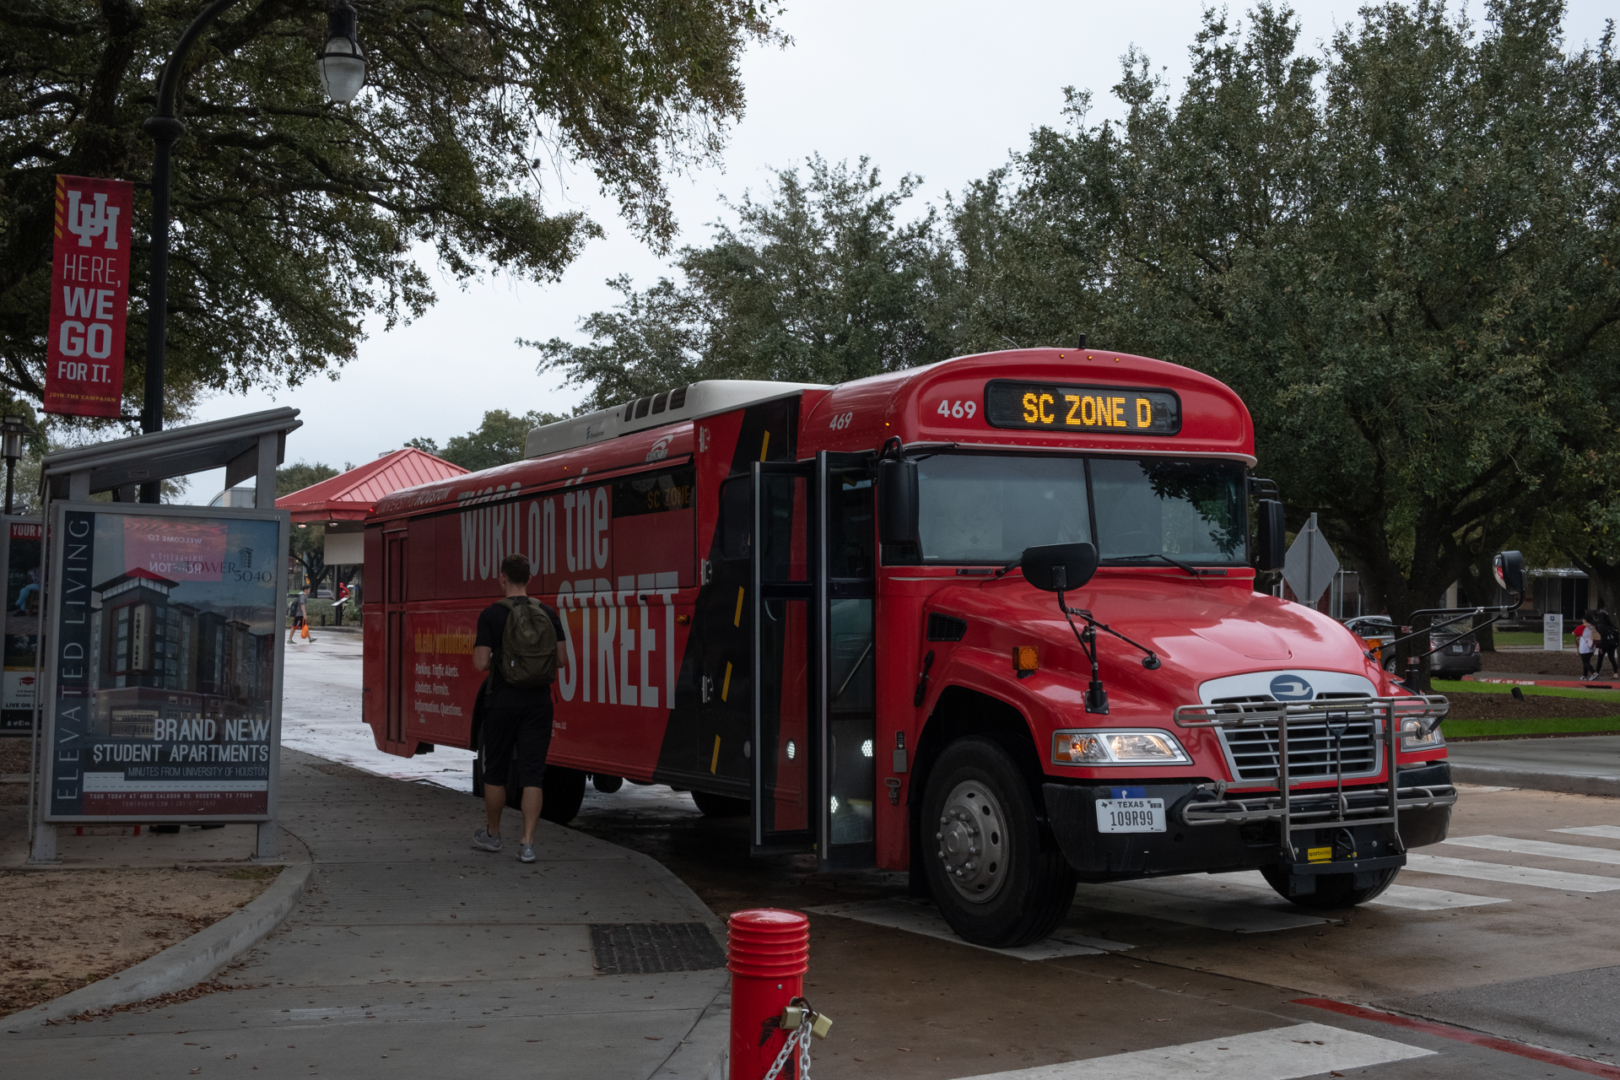 The shuttle tracking is offered through the Cougar Trax GPS system and accessible through the UH Go app. | Kathryn Lenihan/The Cougar